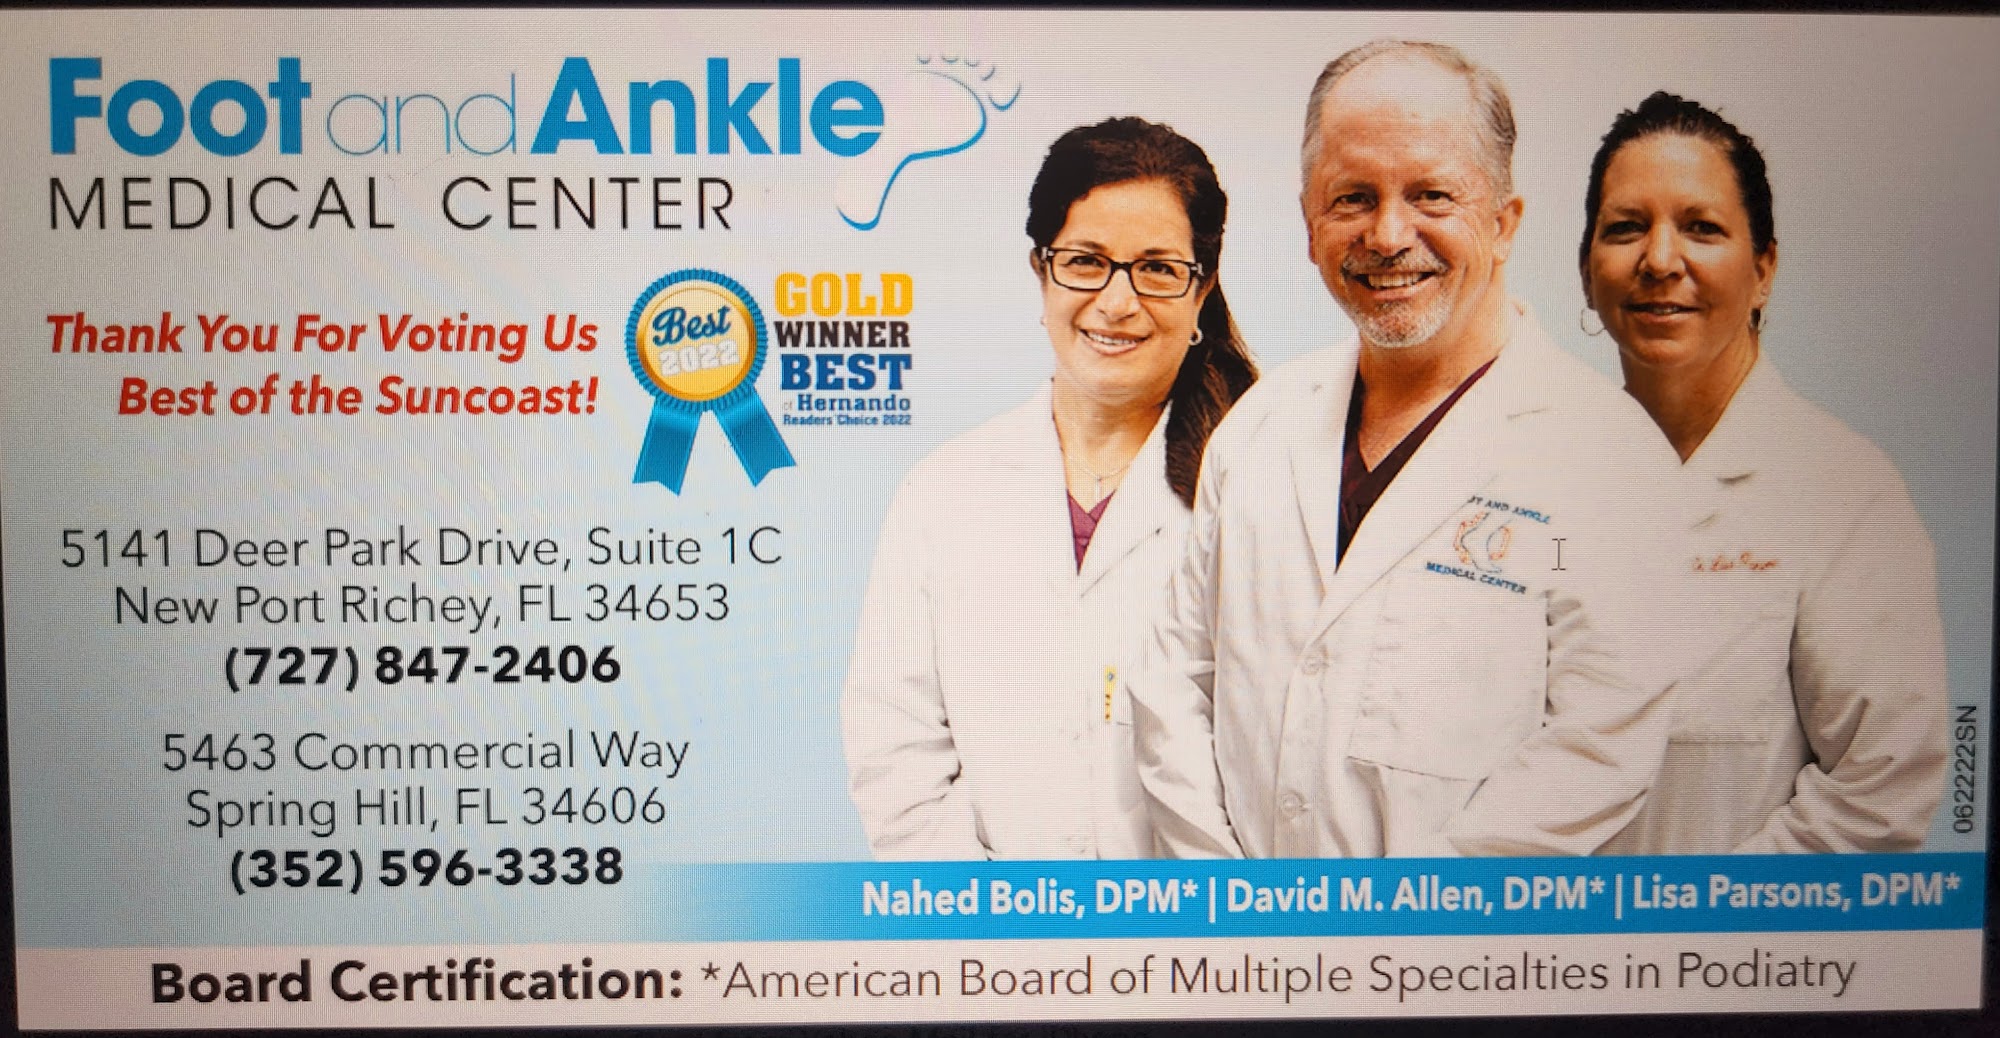 Foot and Ankle Medical Center